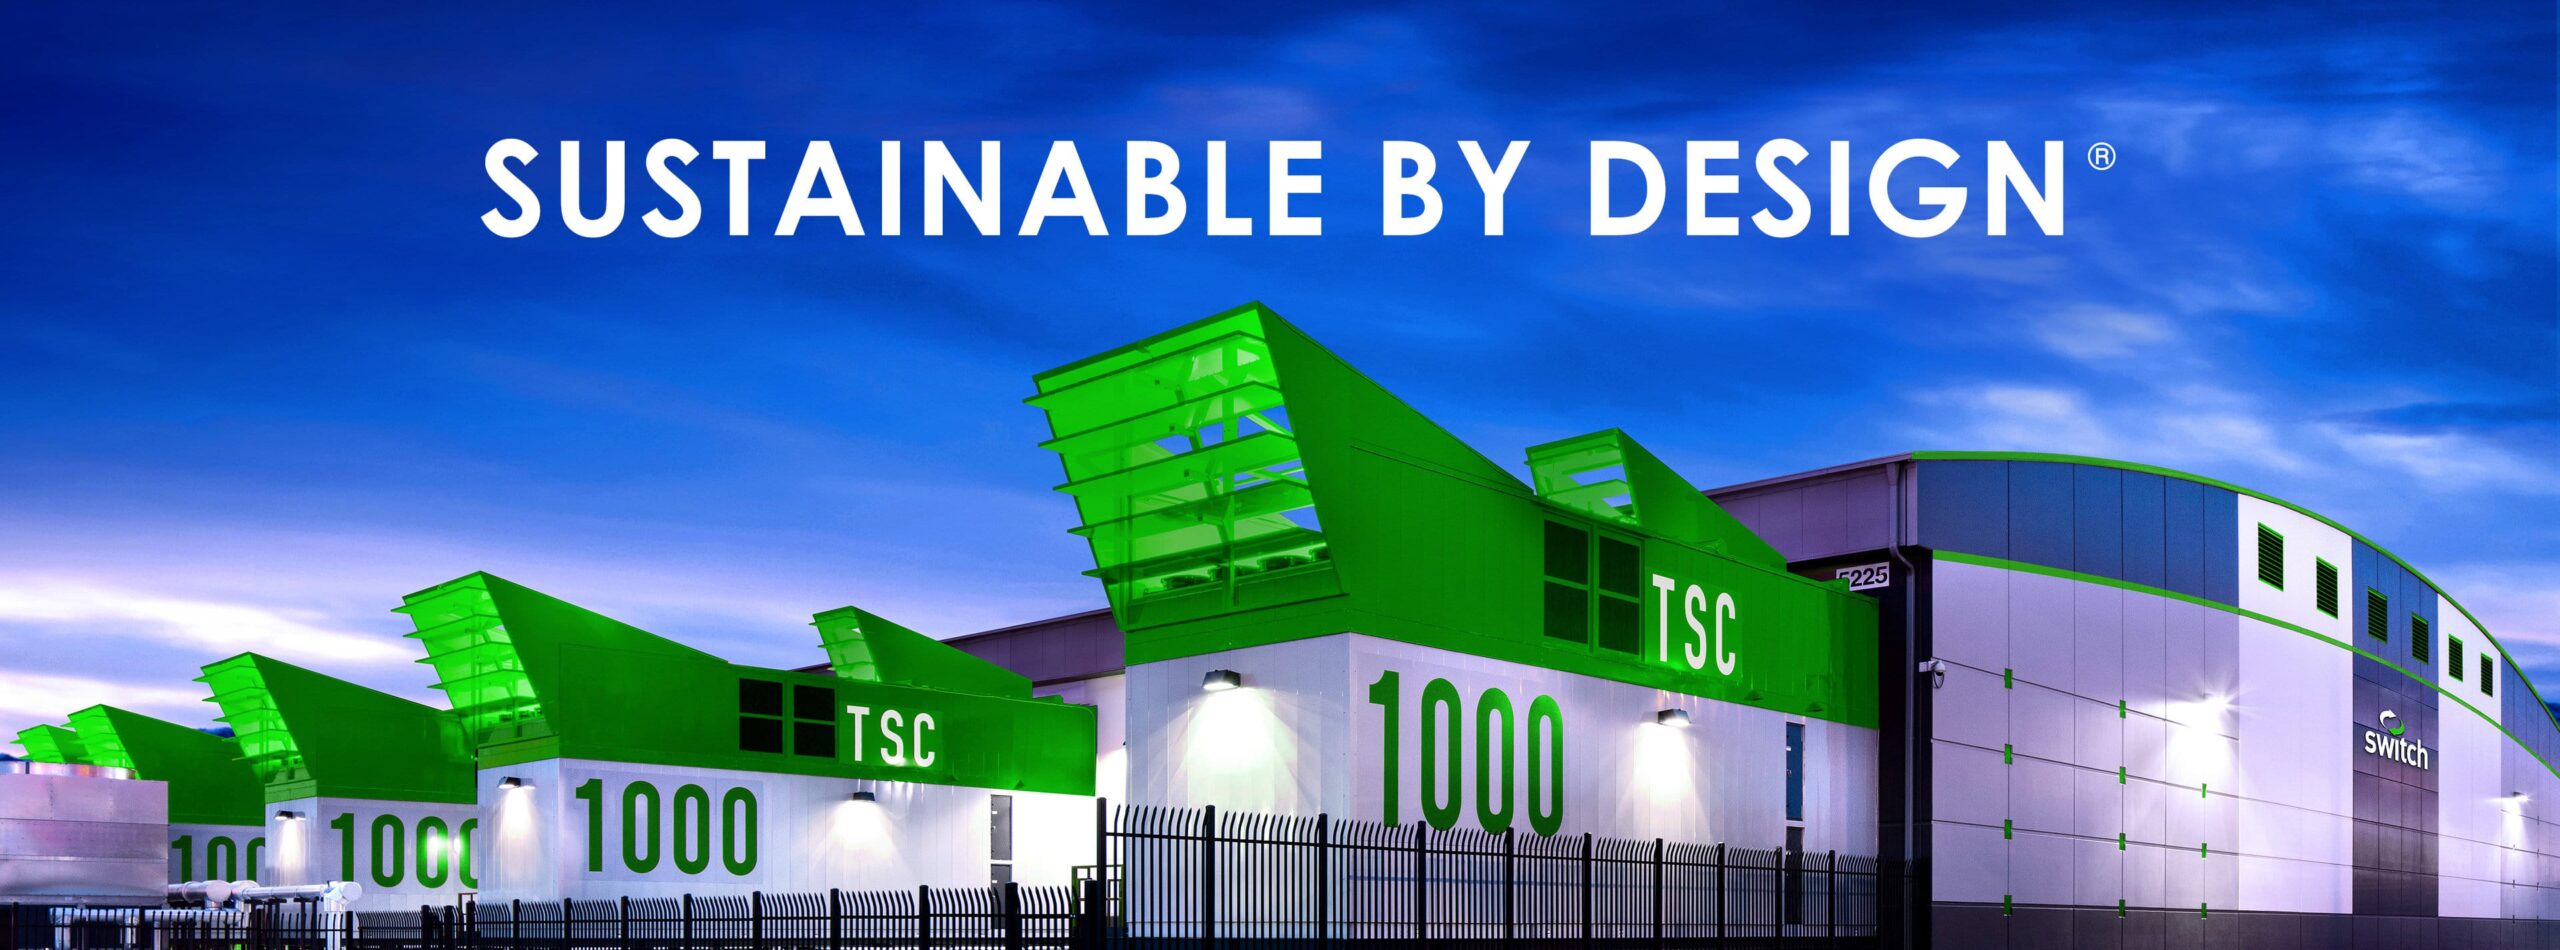 Sustainable By Design | Green Data Center